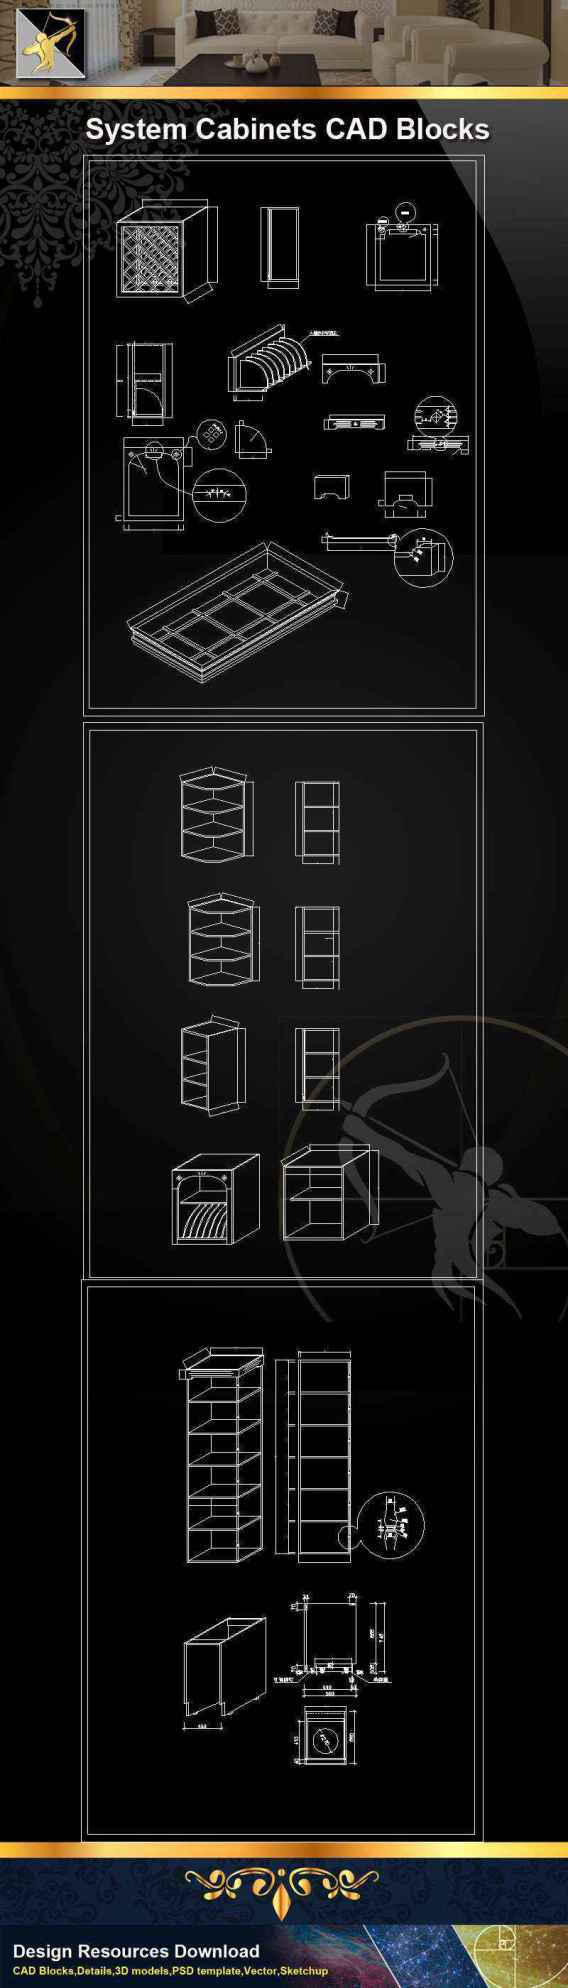 ★【 System Cabinets CAD Drawings V.3】@Autocad Blocks,Drawings,CAD Details,Elevation